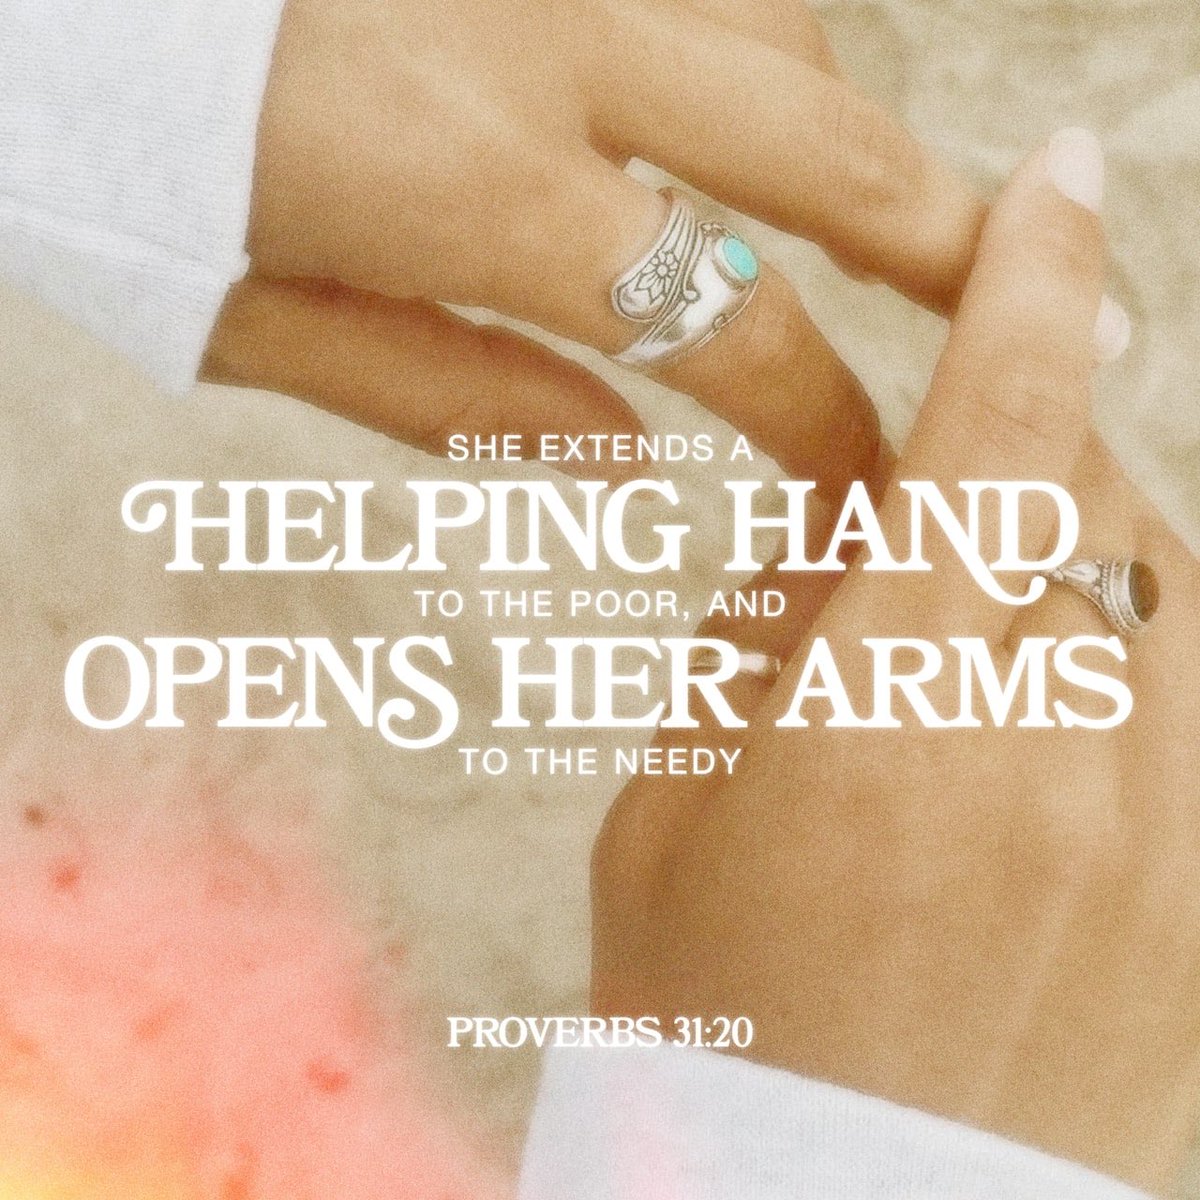 “She opens her hand to the poor and reaches out her hands to the needy.” #Proverbs 31:20 #VerseOfTheDay #REVIVAL #revivalinamerica #proverbs31 #proverbs31woman #christiancreative #prayerjournal #letteryourfaith #letteringhislove #sheletterstruth #shepaintstruth #shedrawstruth